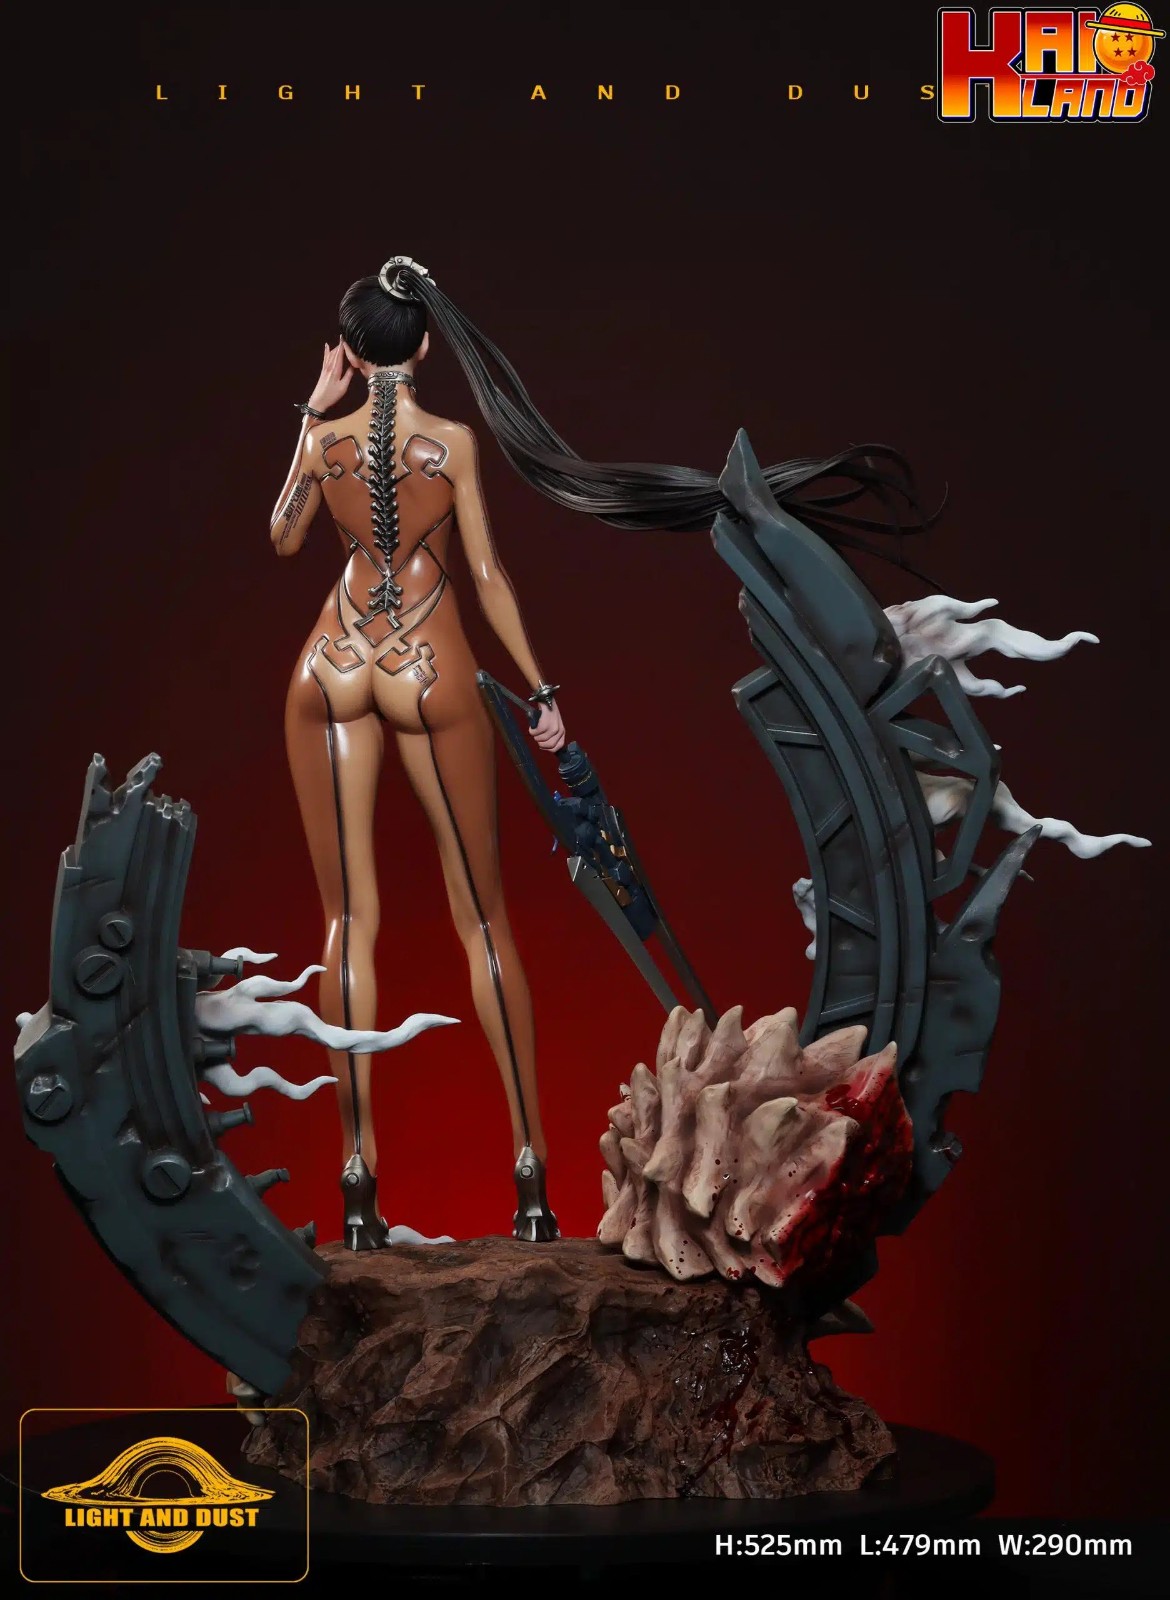  Star Blade "Eve" skin combat clothing 1/4 statue sells for 485 euros